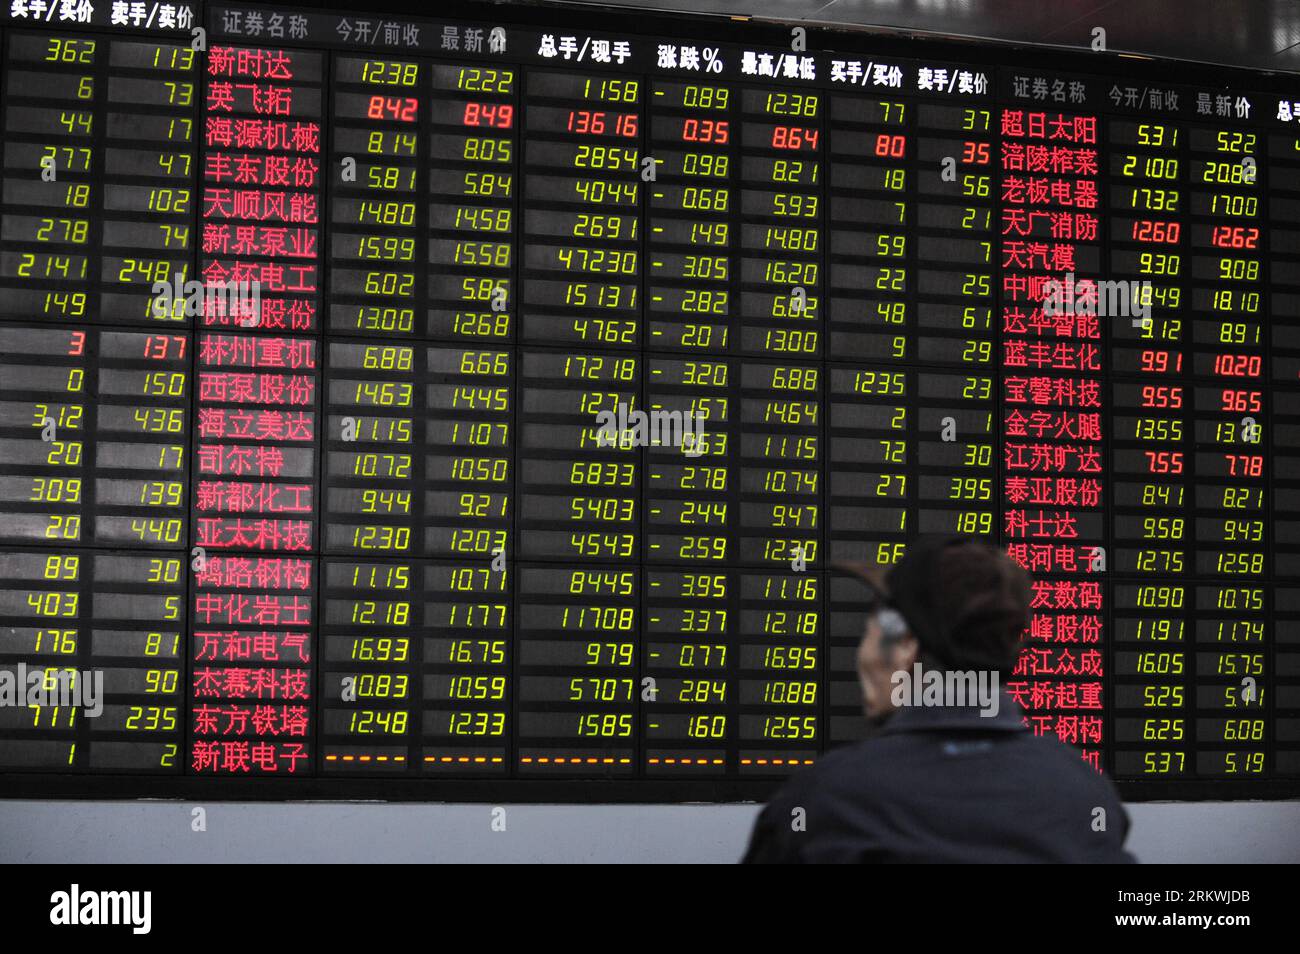 Bildnummer: 58696472  Datum: 13.11.2012  Copyright: imago/Xinhua (121113) -- HANGZHOU, Nov. 13, 2012 (Xinhua) -- An investor looks at the stock price monitor at a stock trading hall in Hangzhou, capital of east China s Zhejiang Province, Nov. 13, 2012. Chinese stocks experienced a decline on Tuesday. The benchmark Shanghai Composite Index dropped 1.51 percent, to close at 2,047.89 points. The Shenzhen Component Index ended at 8,234.60 points, down 1.87 percent. (Xinhua/Ju Huanzong) (zc) CHINA-STOCKS-DOWN (CN) PUBLICATIONxNOTxINxCHN Wirtschaft Börse Kurs Aktien Aktienkurs Börsenkurs x0x xdd 201 Stock Photo